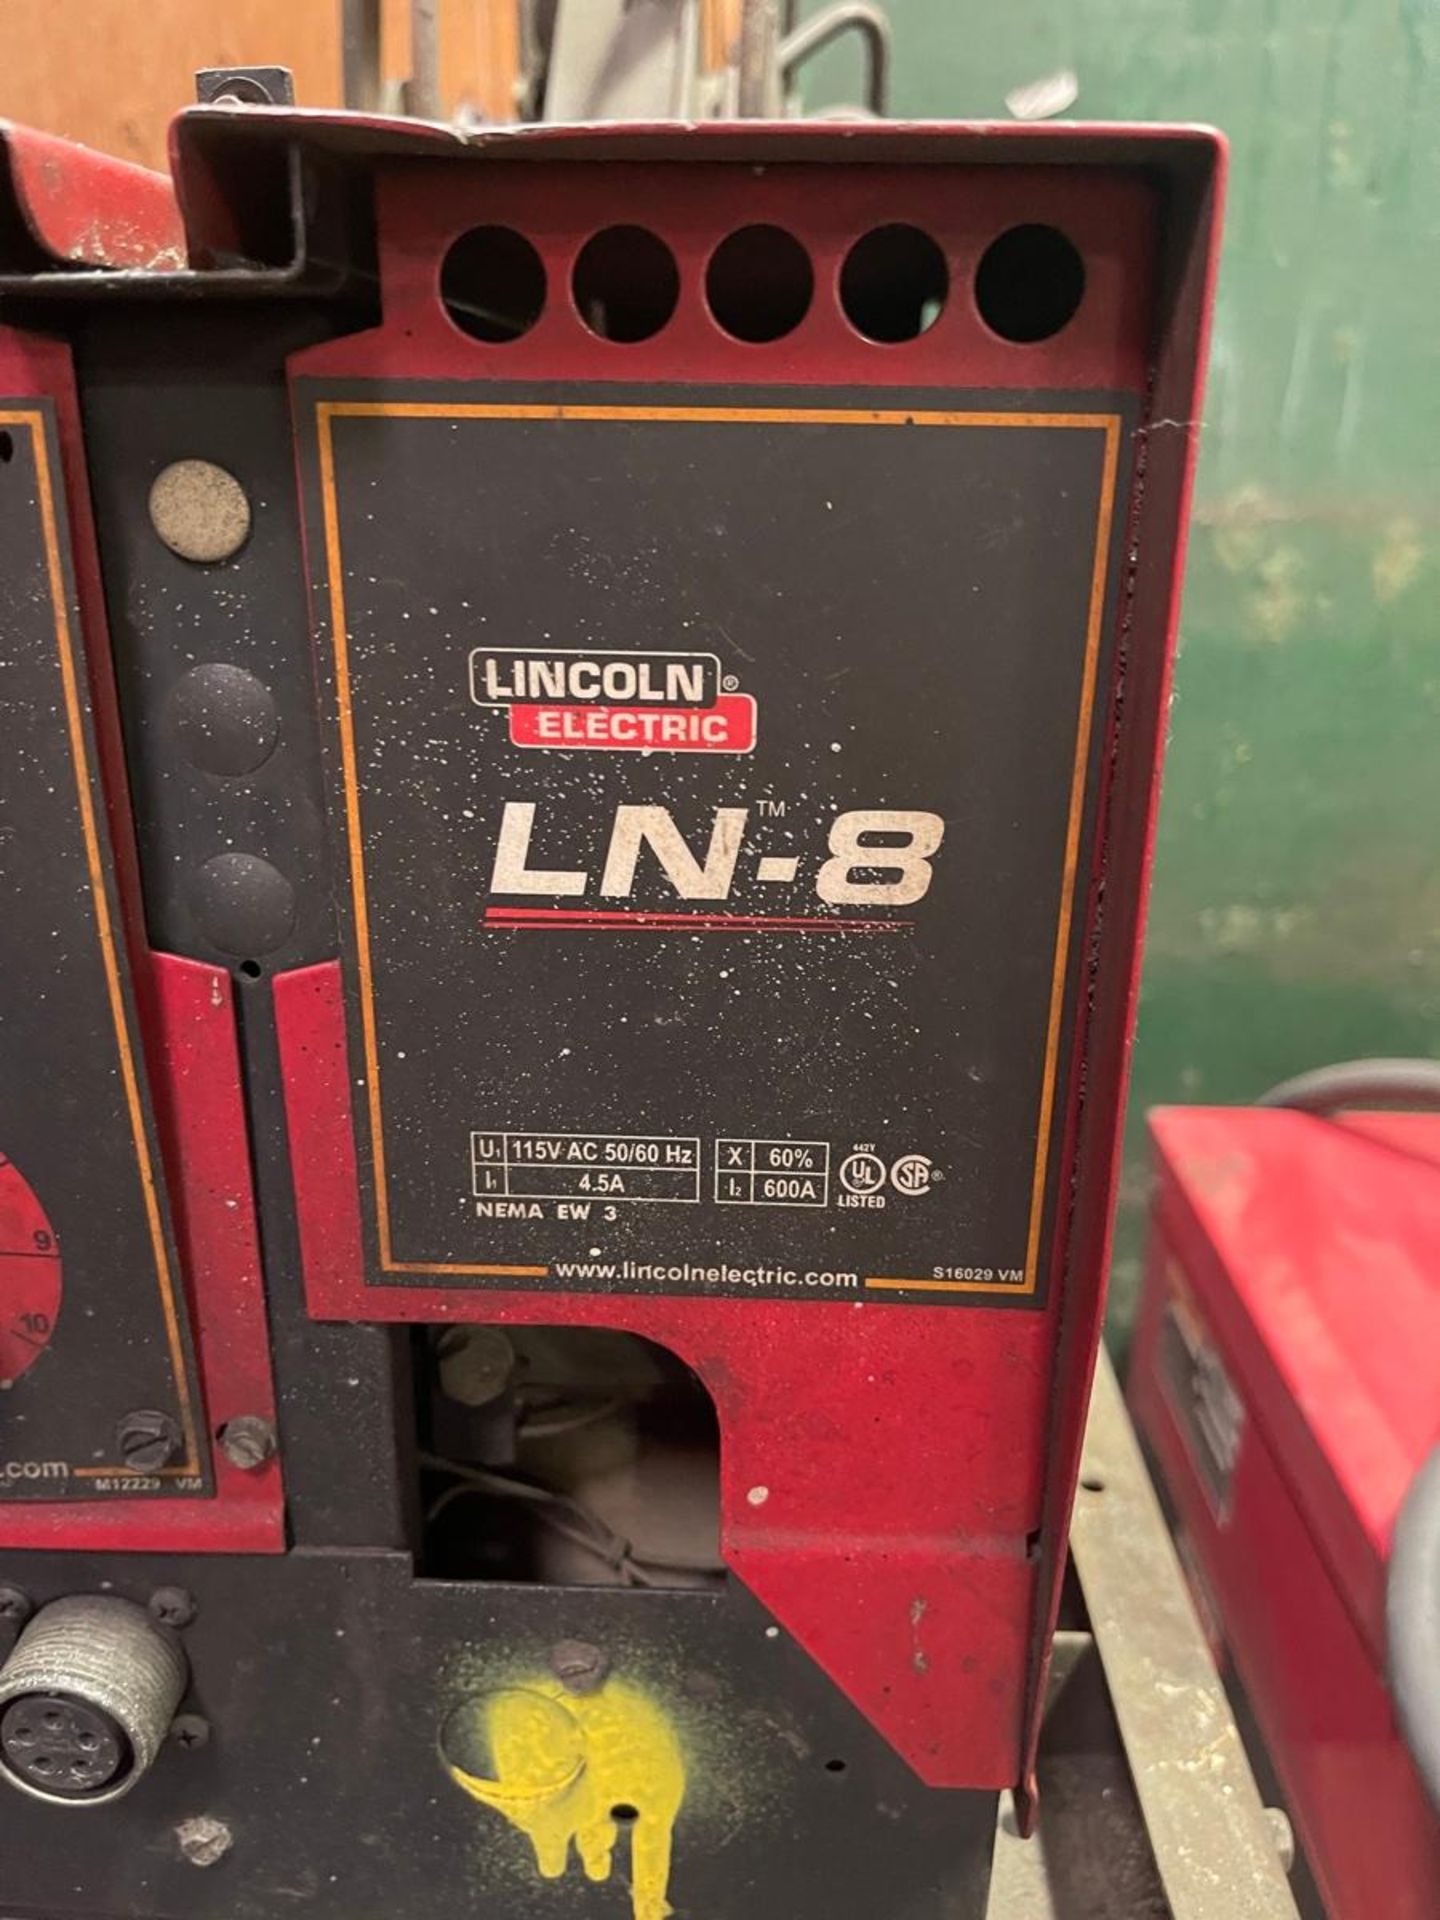 Lincoln Electric IDEALARC DC600 Multiprocess Welder - Image 4 of 6